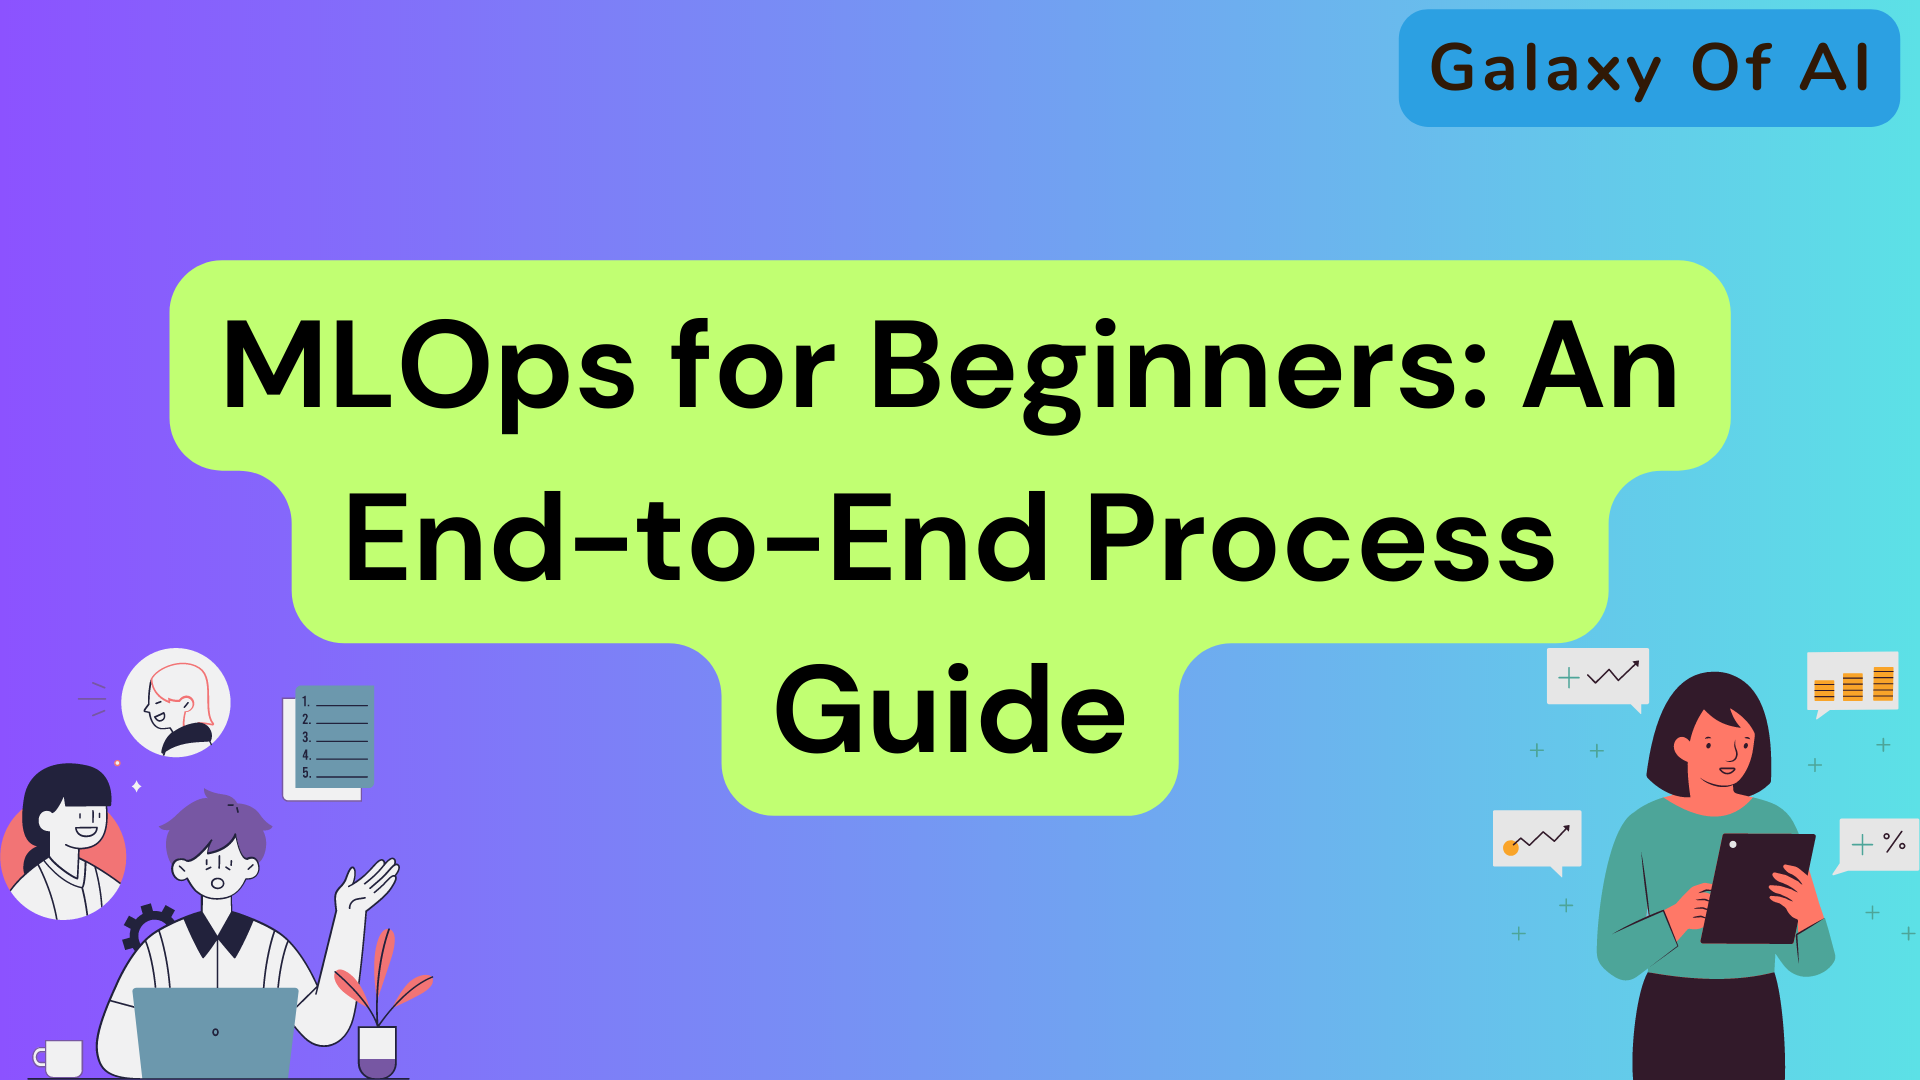 MLOps for Beginners: An End-to-End Process Guide